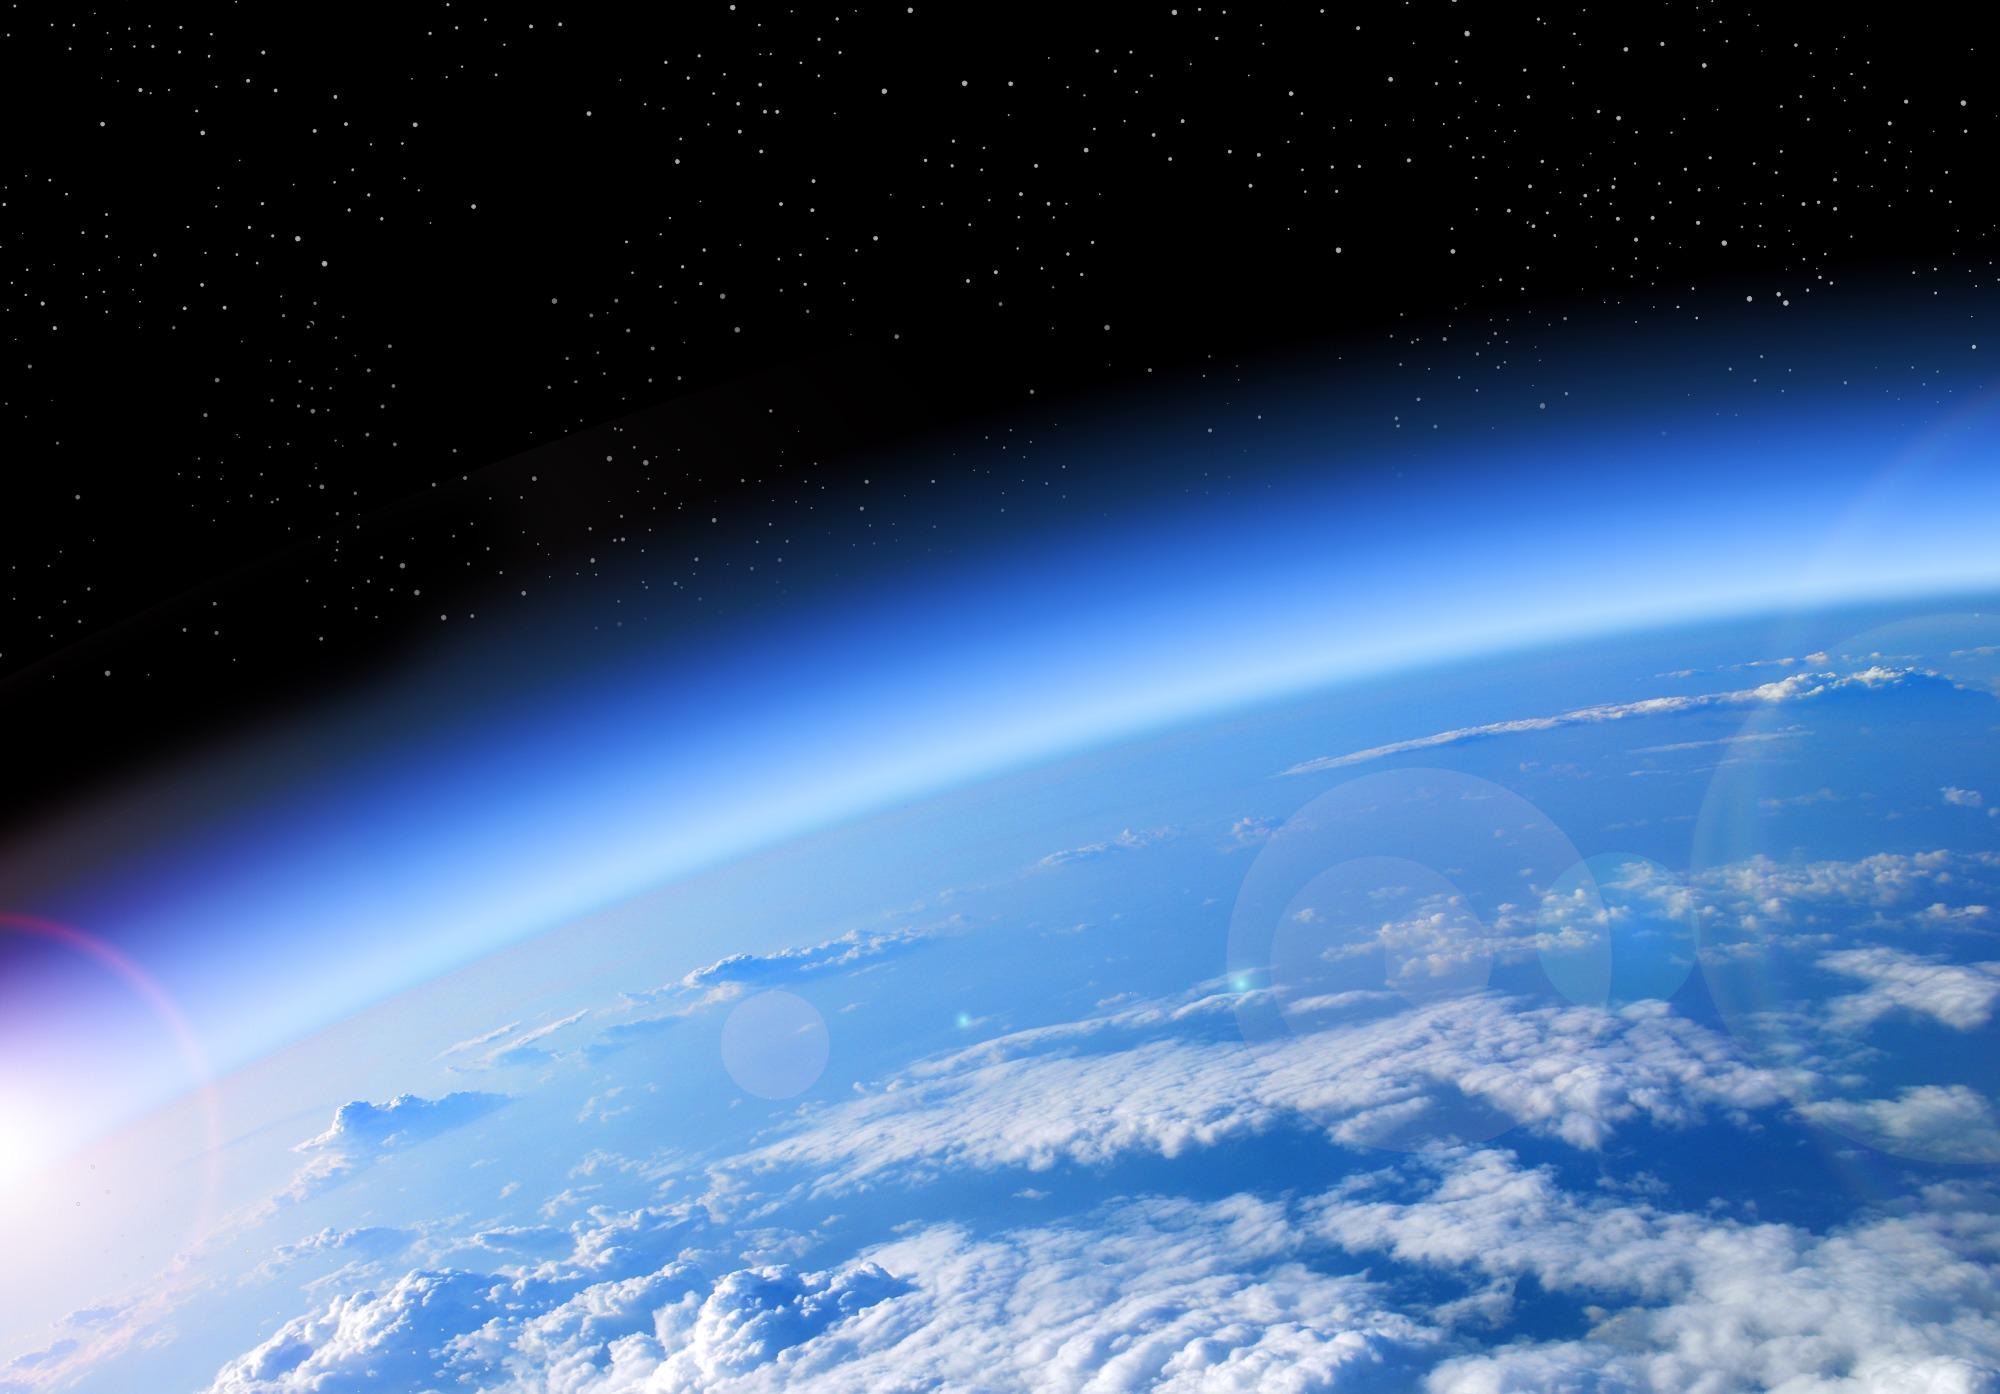 Ozone Weakens One of Earth’s Main Cooling Mechanisms.